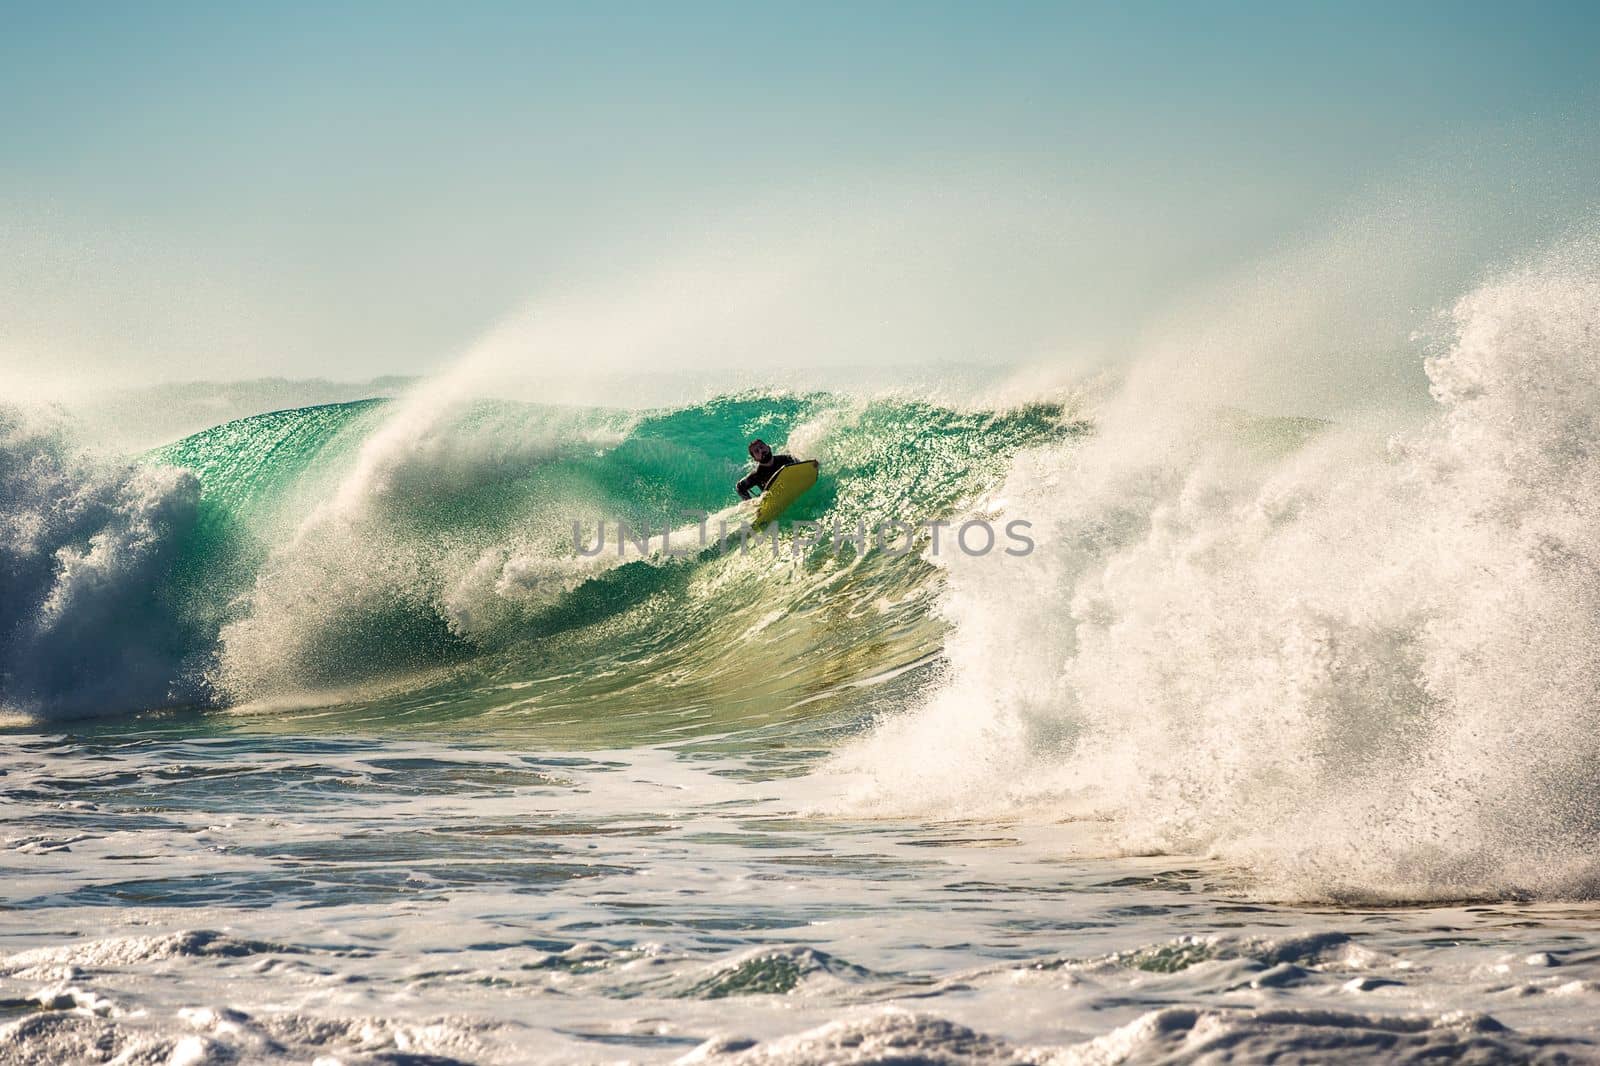 man surfing a big wave that breaks with a lot of energy and power, sunlight reflects golden on the turquoise surface of the sea and in the huge pile of foam, the wind rises plumes of water